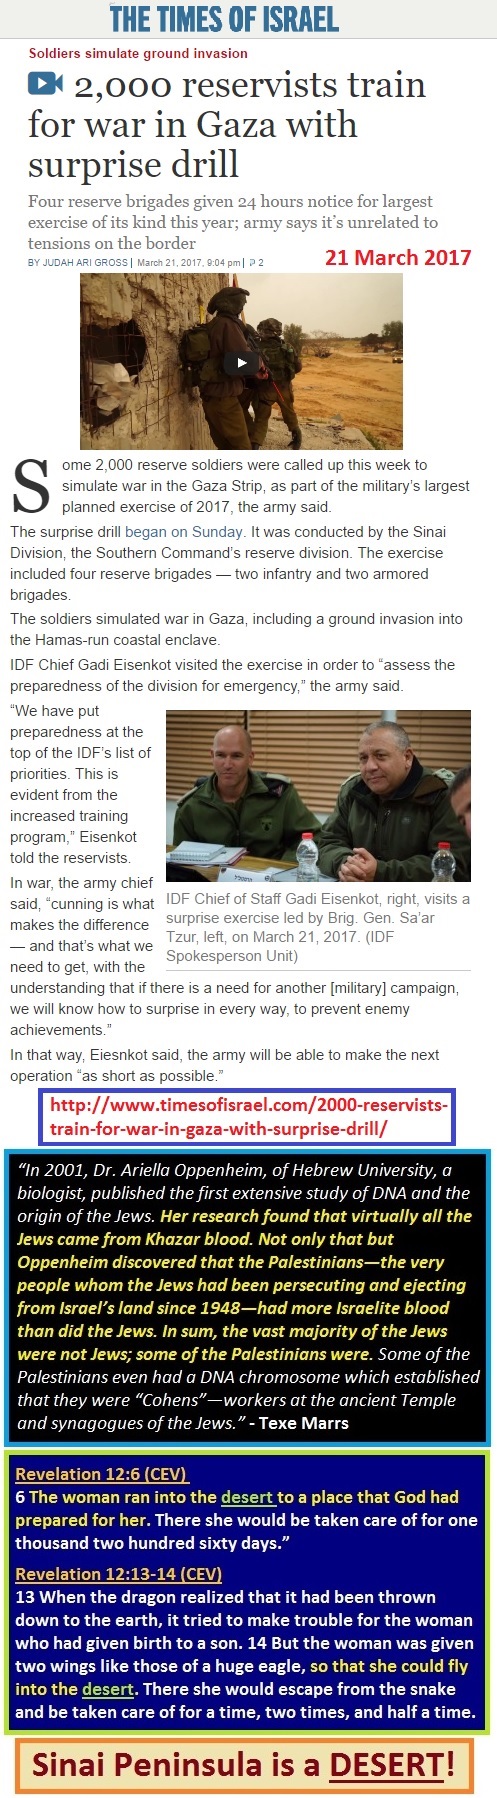 https://www.timesofisrael.com/2000-reservists-train-for-war-in-gaza-with-surprise-drill/